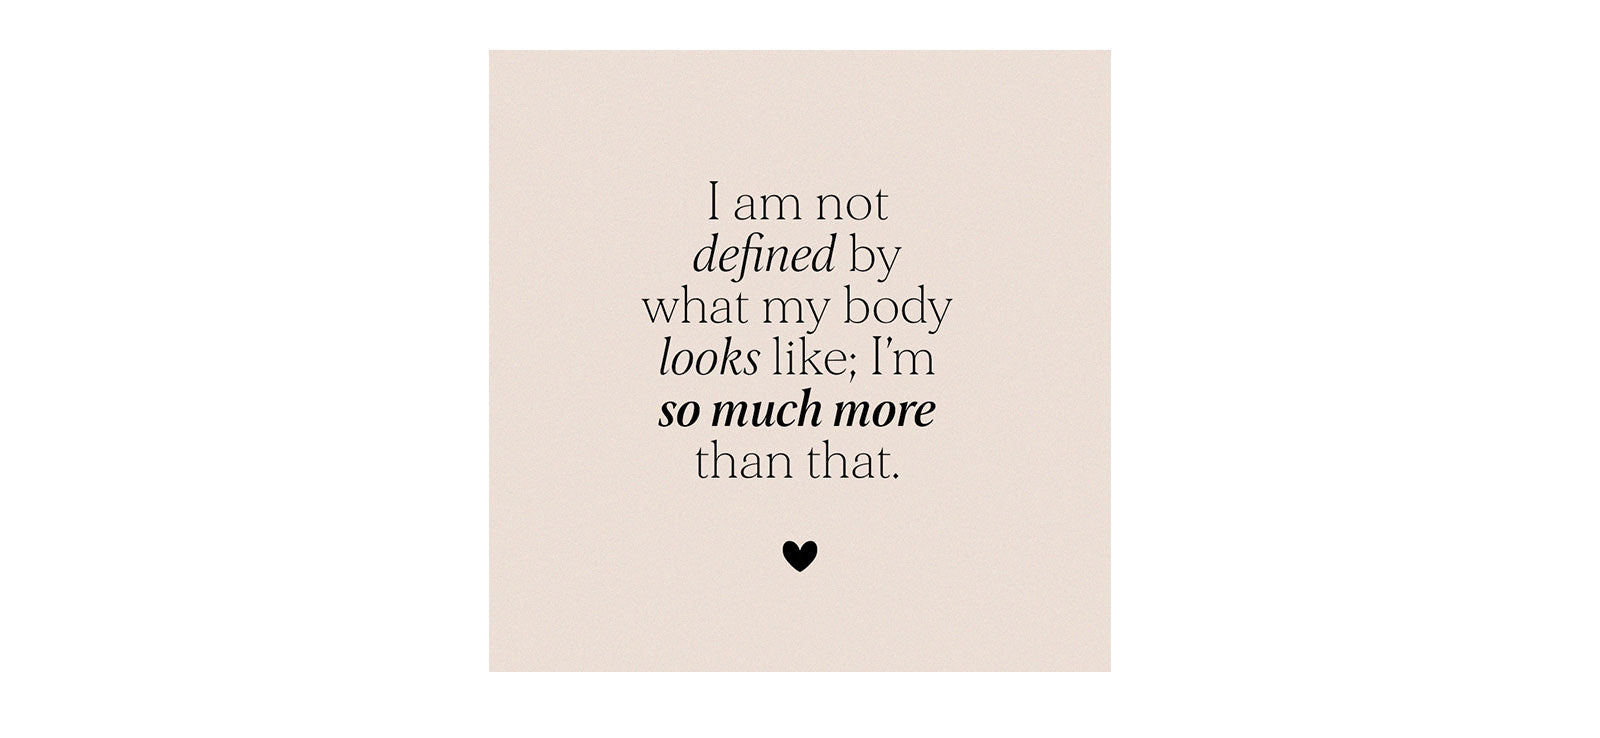 Affirmation: I am not defined by what my body looks like; I am so much more than that